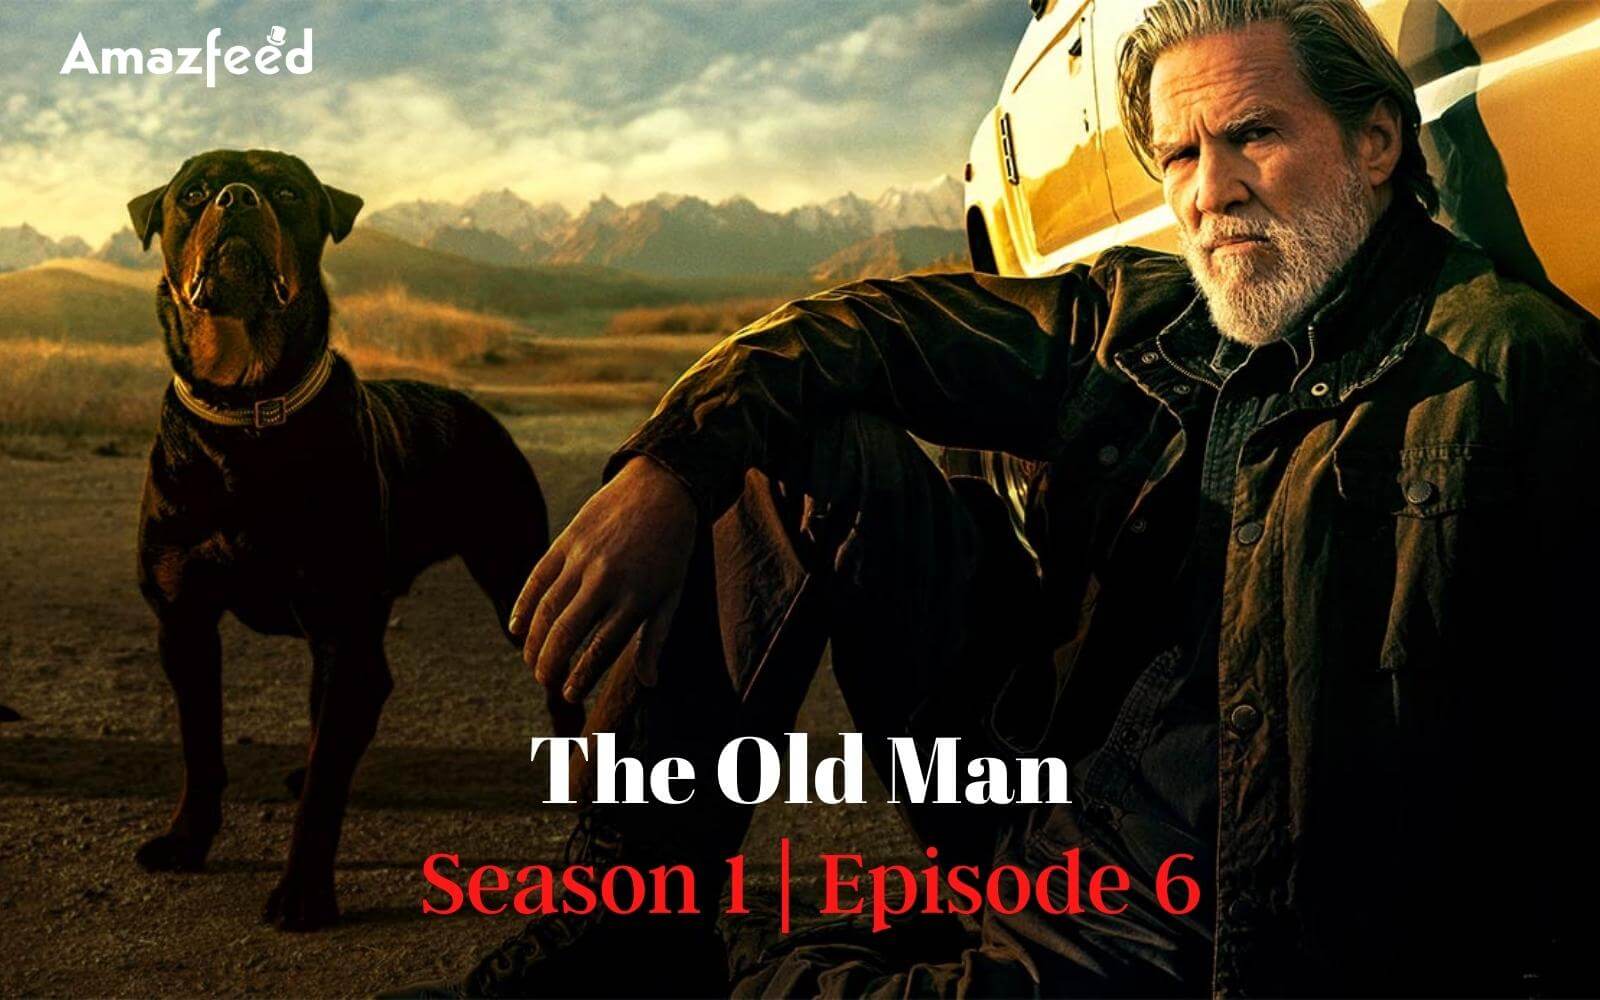 The Old Man Season 1 Episode 6: Countdown, Release Date, Spoiler, and